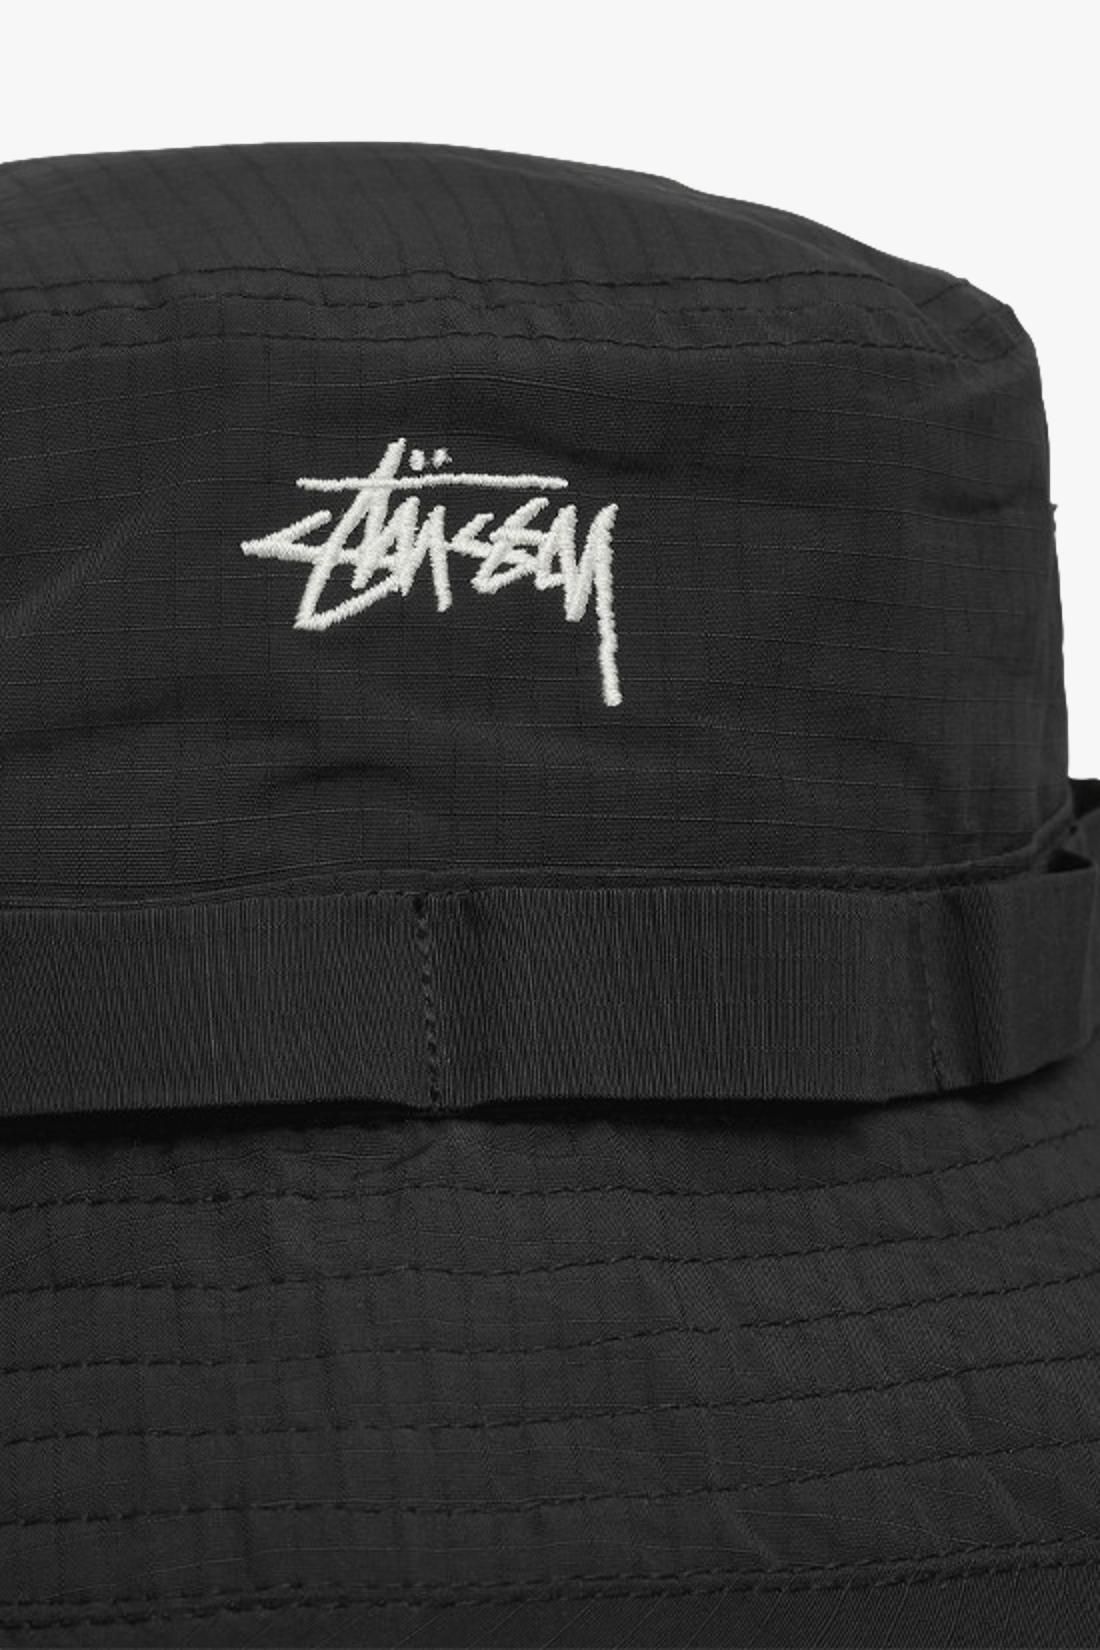 STUSSY / Nyco ripstop boonie hat Black